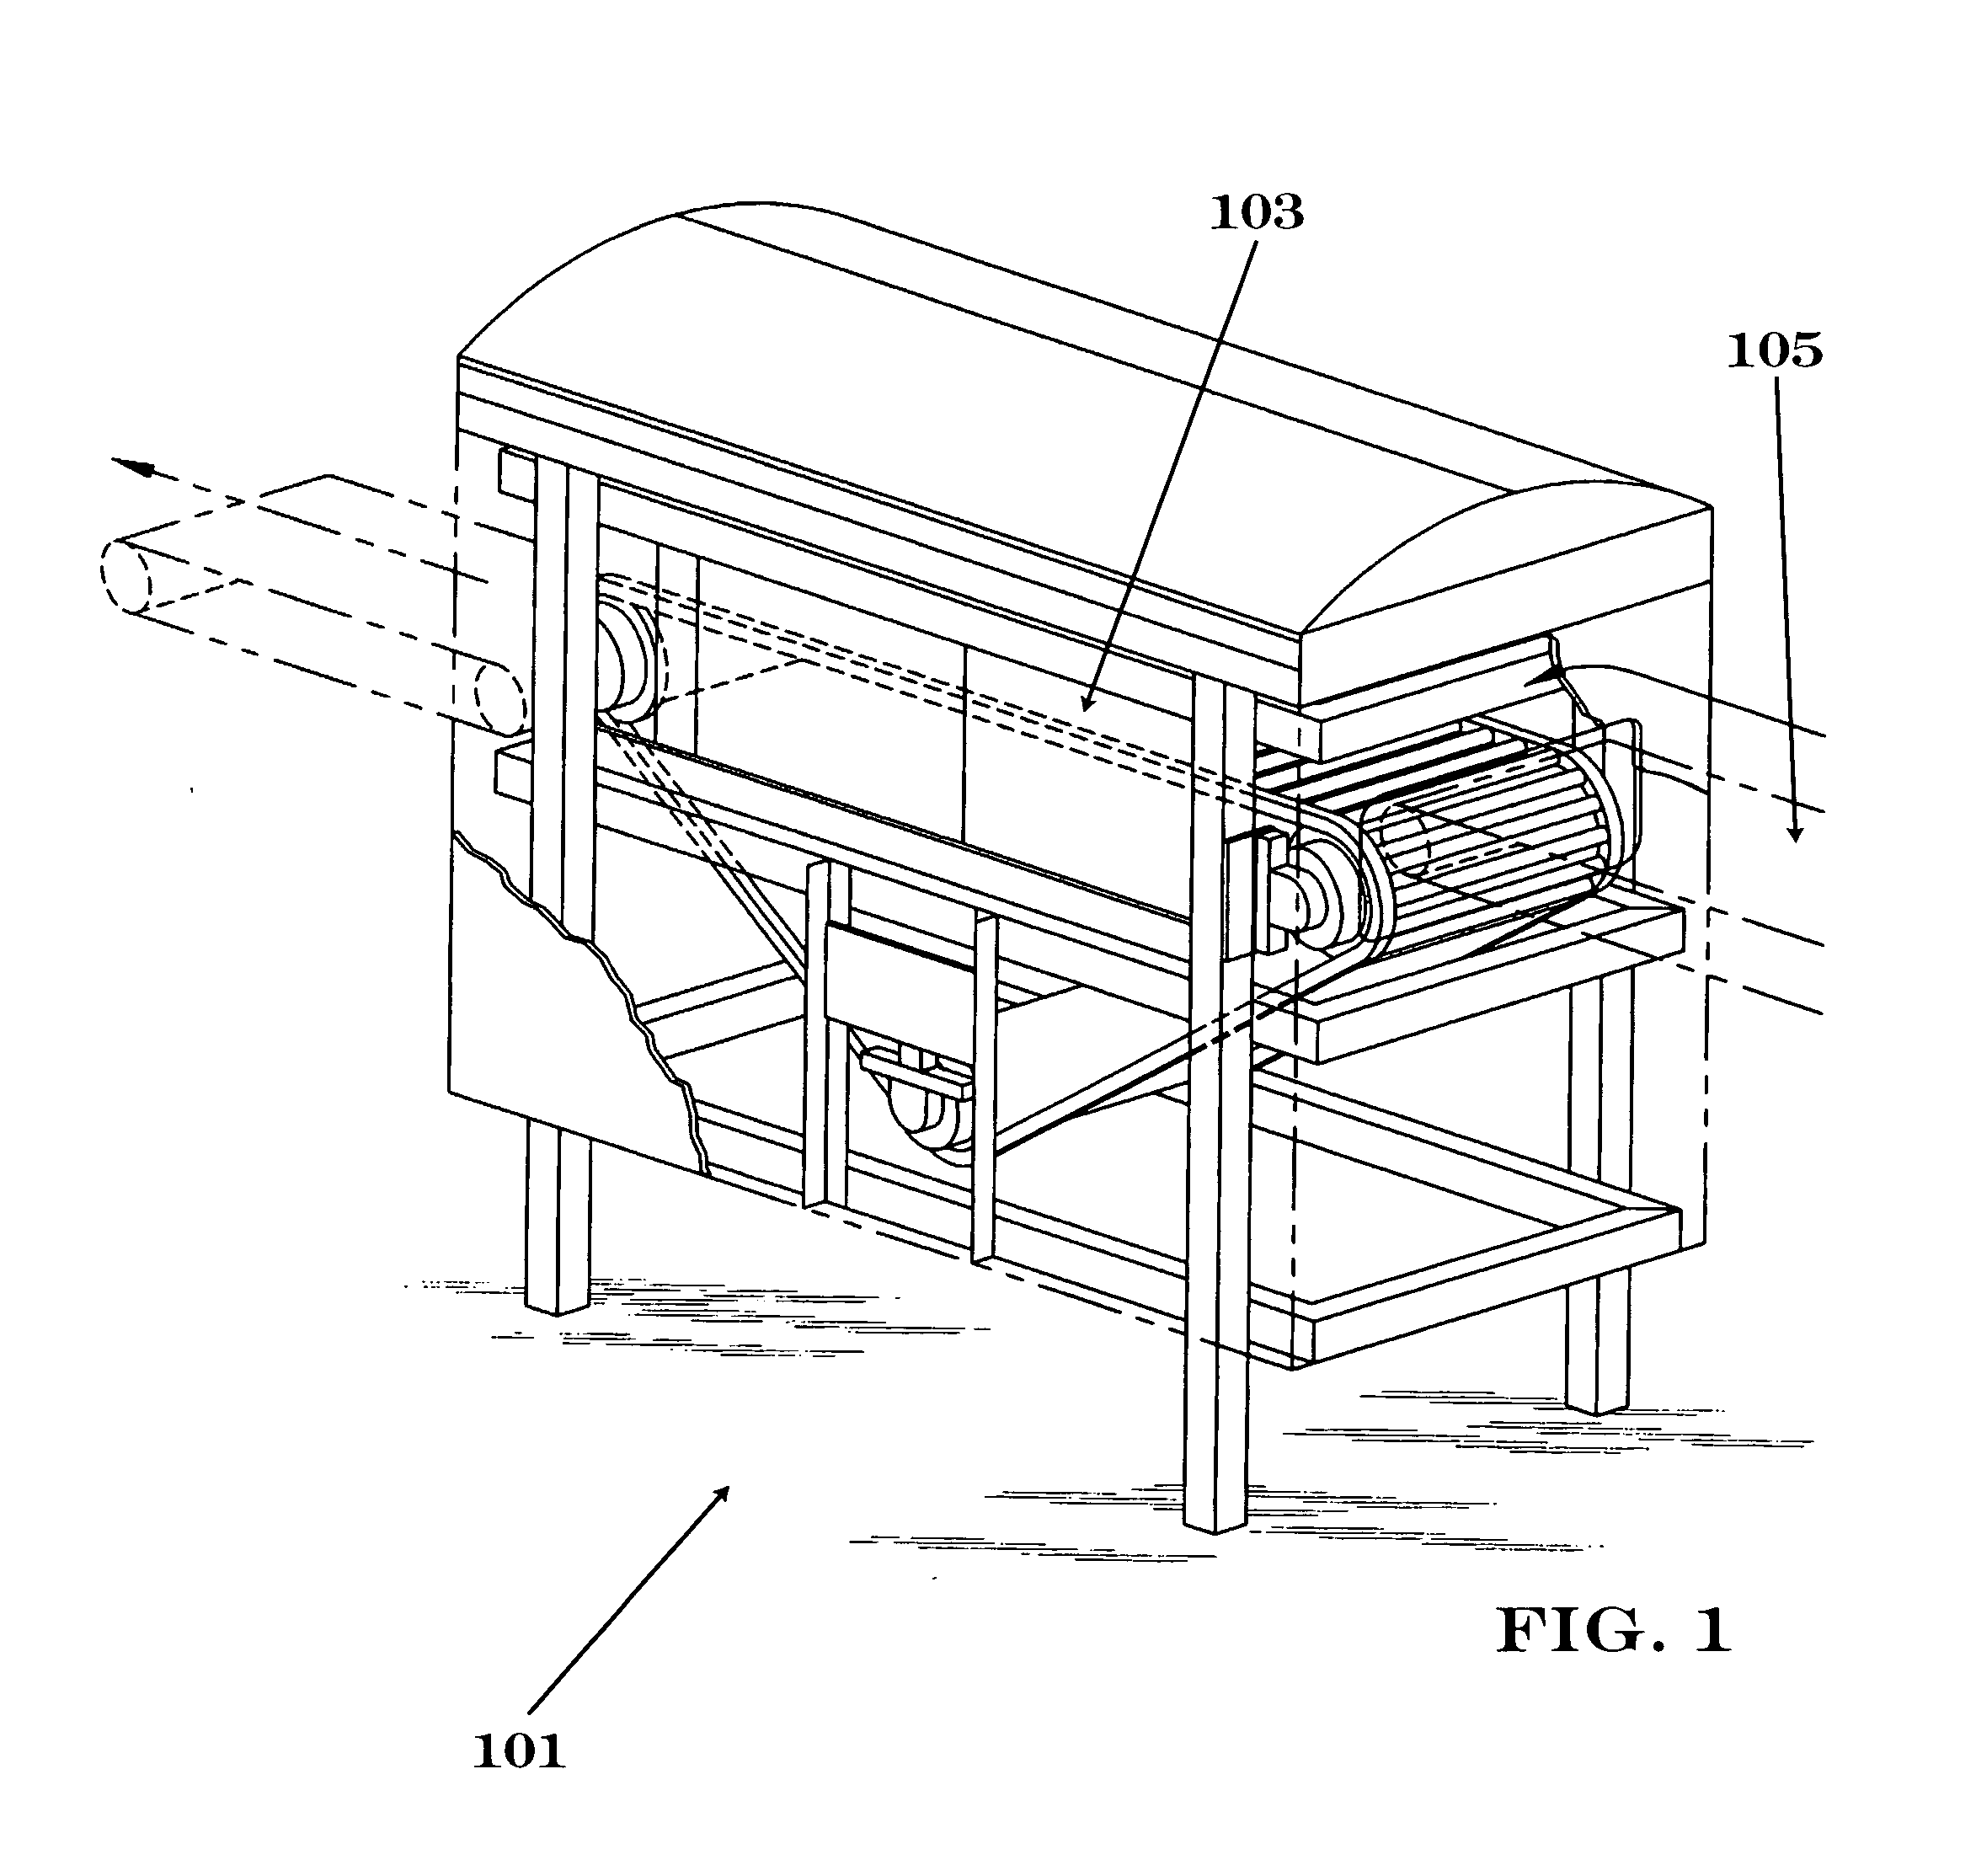 Apparatus and method for inline solid, semisolid, or liquid antimicrobial treatment